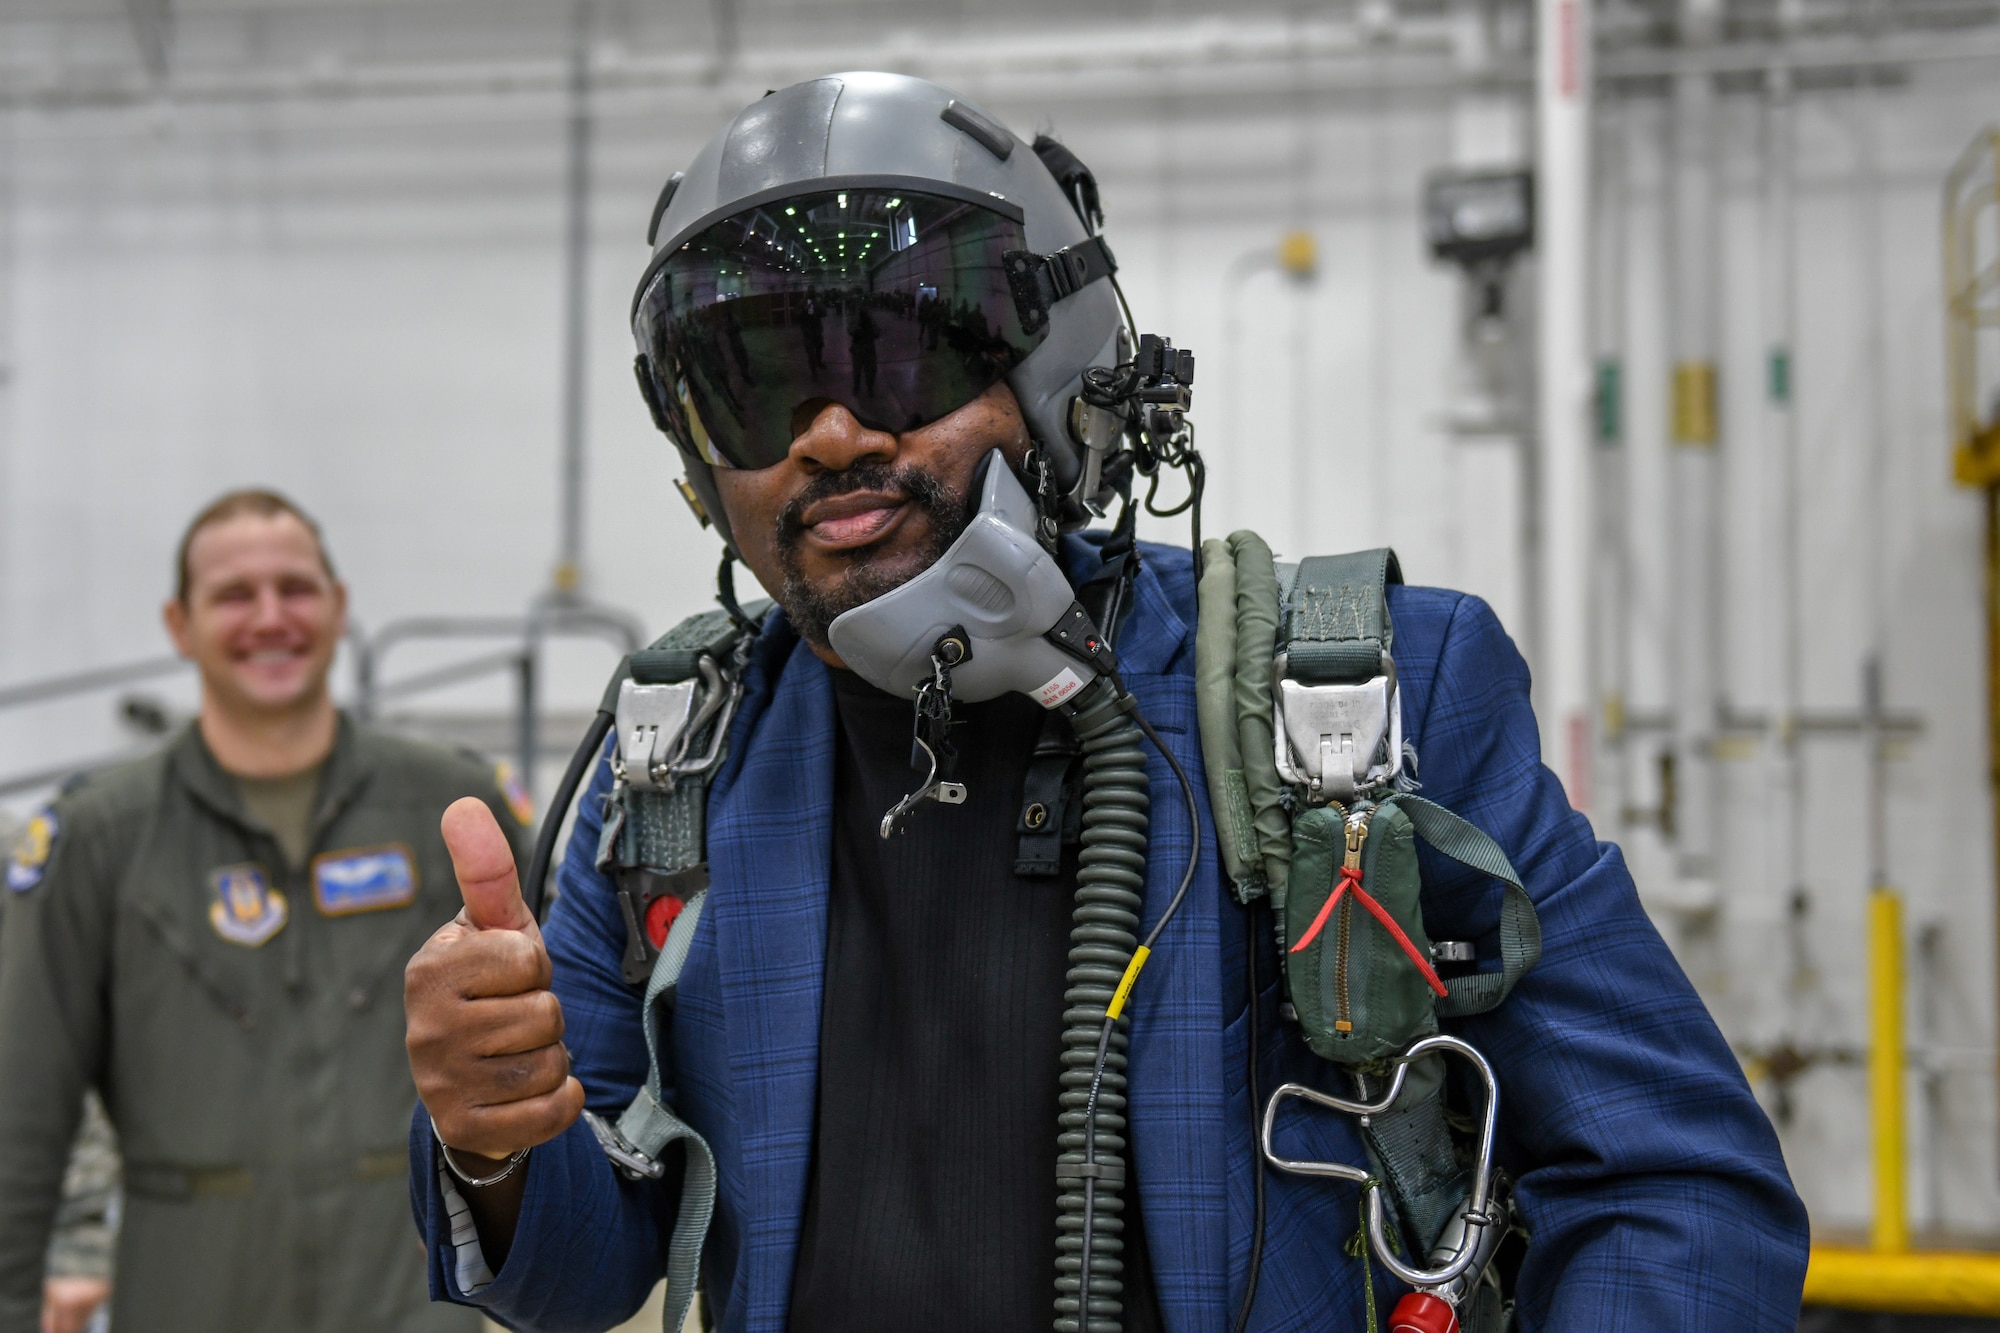 YARS hosted a Career and Diversity Day to bring together the unique differences of Airmen to form a valued organization where Airmen know they can prosper and continue to serve with pride.